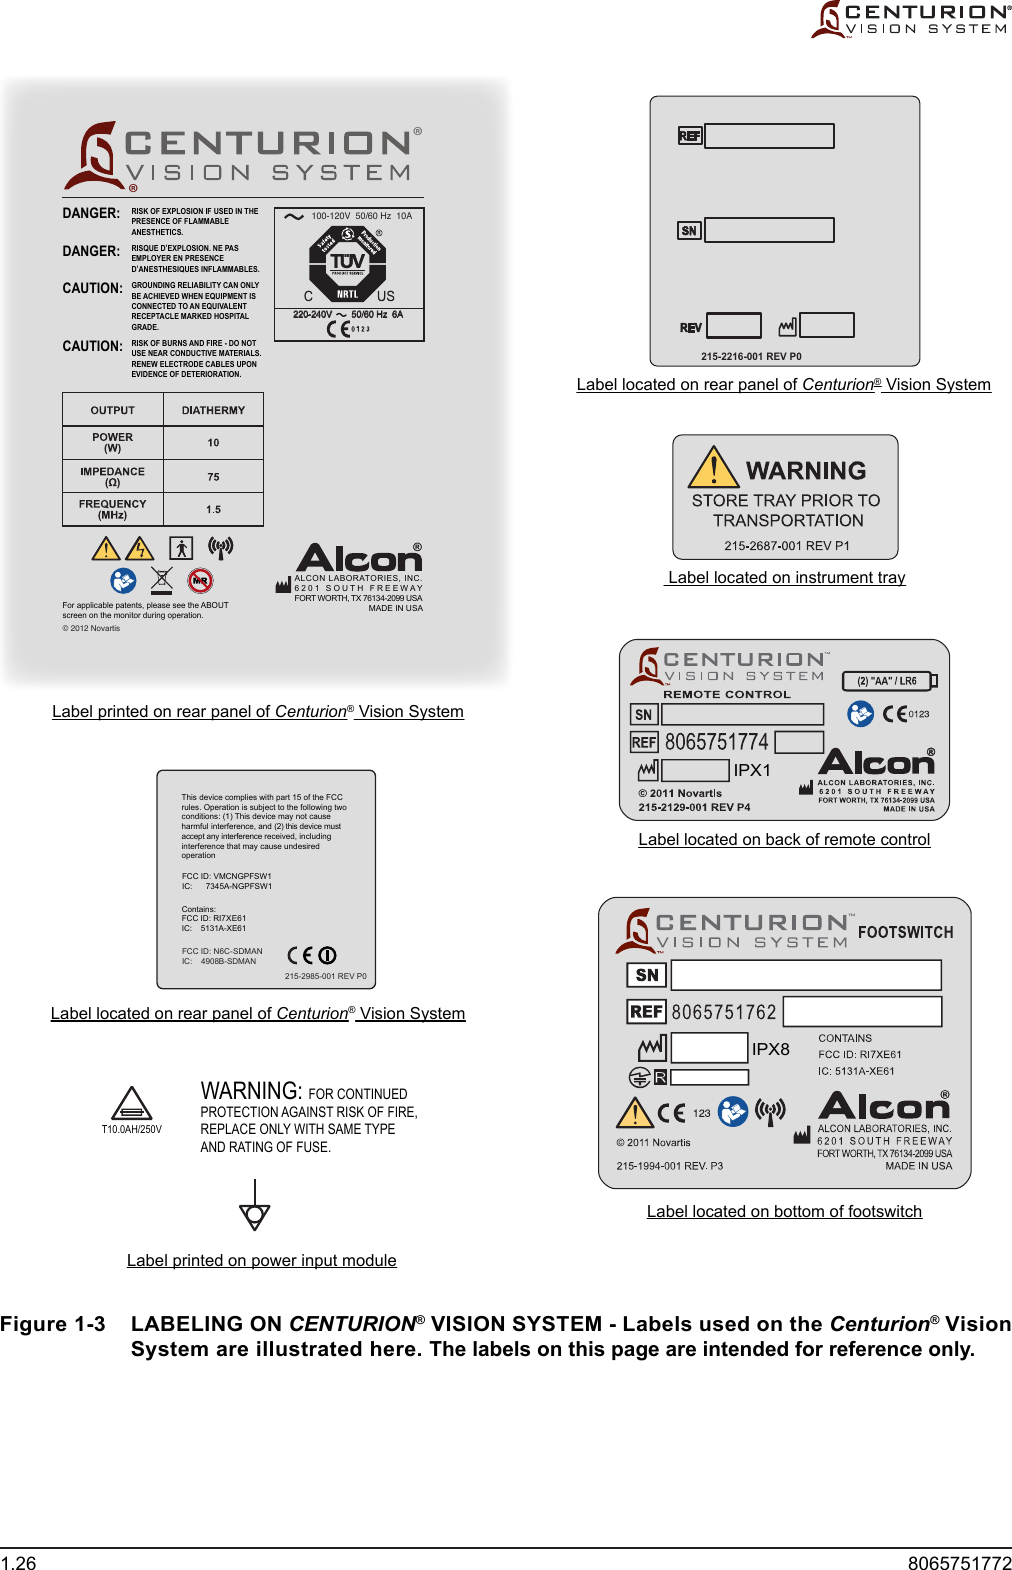 1.26  8065751772Figure 1-3  LABELING ON CENTURION® VISION SYSTEM - Labels used on the Centurion® Vision System are illustrated here. The labels on this page are intended for reference only.215-2216-001 REV P0Label printed on rear panel of Centurion® Vision SystemLabel located on rear panel of Centurion® Vision SystemLabel printed on power input moduleLabel located on rear panel of Centurion® Vision SystemLabel located on back of remote controlLabel located on bottom of footswitch Label located on instrument trayT10.0AH/250VWARNING:FOR CONTINUEDPROTECTION AGAINST RISK OF FIRE,REPLACE ONLY WITH SAME TYPEAND RATING OF FUSE.IPX8IPX1®© 2012 Novartis220-240V        50/60 Hz  6A100-120V  50/60 Hz  10AFor applicable patents, please see the ABOUTscreen on the monitor during operation.ALCON LABORATORIES, INC.6201 SOUTH FREEWAYFORT WORTH, TX 76134-2099 USAMADE IN USA®®DANGER:DANGER:CAUTION:CAUTION:RISK OF EXPLOSION IF USED IN THEPRESENCE OF FLAMMABLEANESTHETICS.RISQUE D’EXPLOSION. NE PASEMPLOYER EN PRESENCED’ANESTHESIQUES INFLAMMABLES.GROUNDING RELIABILITY CAN ONLYBE ACHIEVED WHEN EQUIPMENT ISCONNECTED TO AN EQUIVALENTRECEPTACLE MARKED HOSPITALGRADE.RISK OF BURNS AND FIRE - DO NOTUSE NEAR CONDUCTIVE MATERIALS.RENEW ELECTRODE CABLES UPONEVIDENCE OF DETERIORATION.This device complies with part 15 of the FCCrules. Operation is subject to the following twoconditions: (1) This device may not causeharmful interference, and (2) this device mustaccept any interference received, includinginterference that may cause undesiredoperationFCC ID: VMCNGPFSW1IC:      7345A-NGPFSW1Contains:FCC ID: RI7XE61IC:    5131A-XE61FCC ID: N6C-SDMANIC:    4908B-SDMAN215-2985-001 REV P0